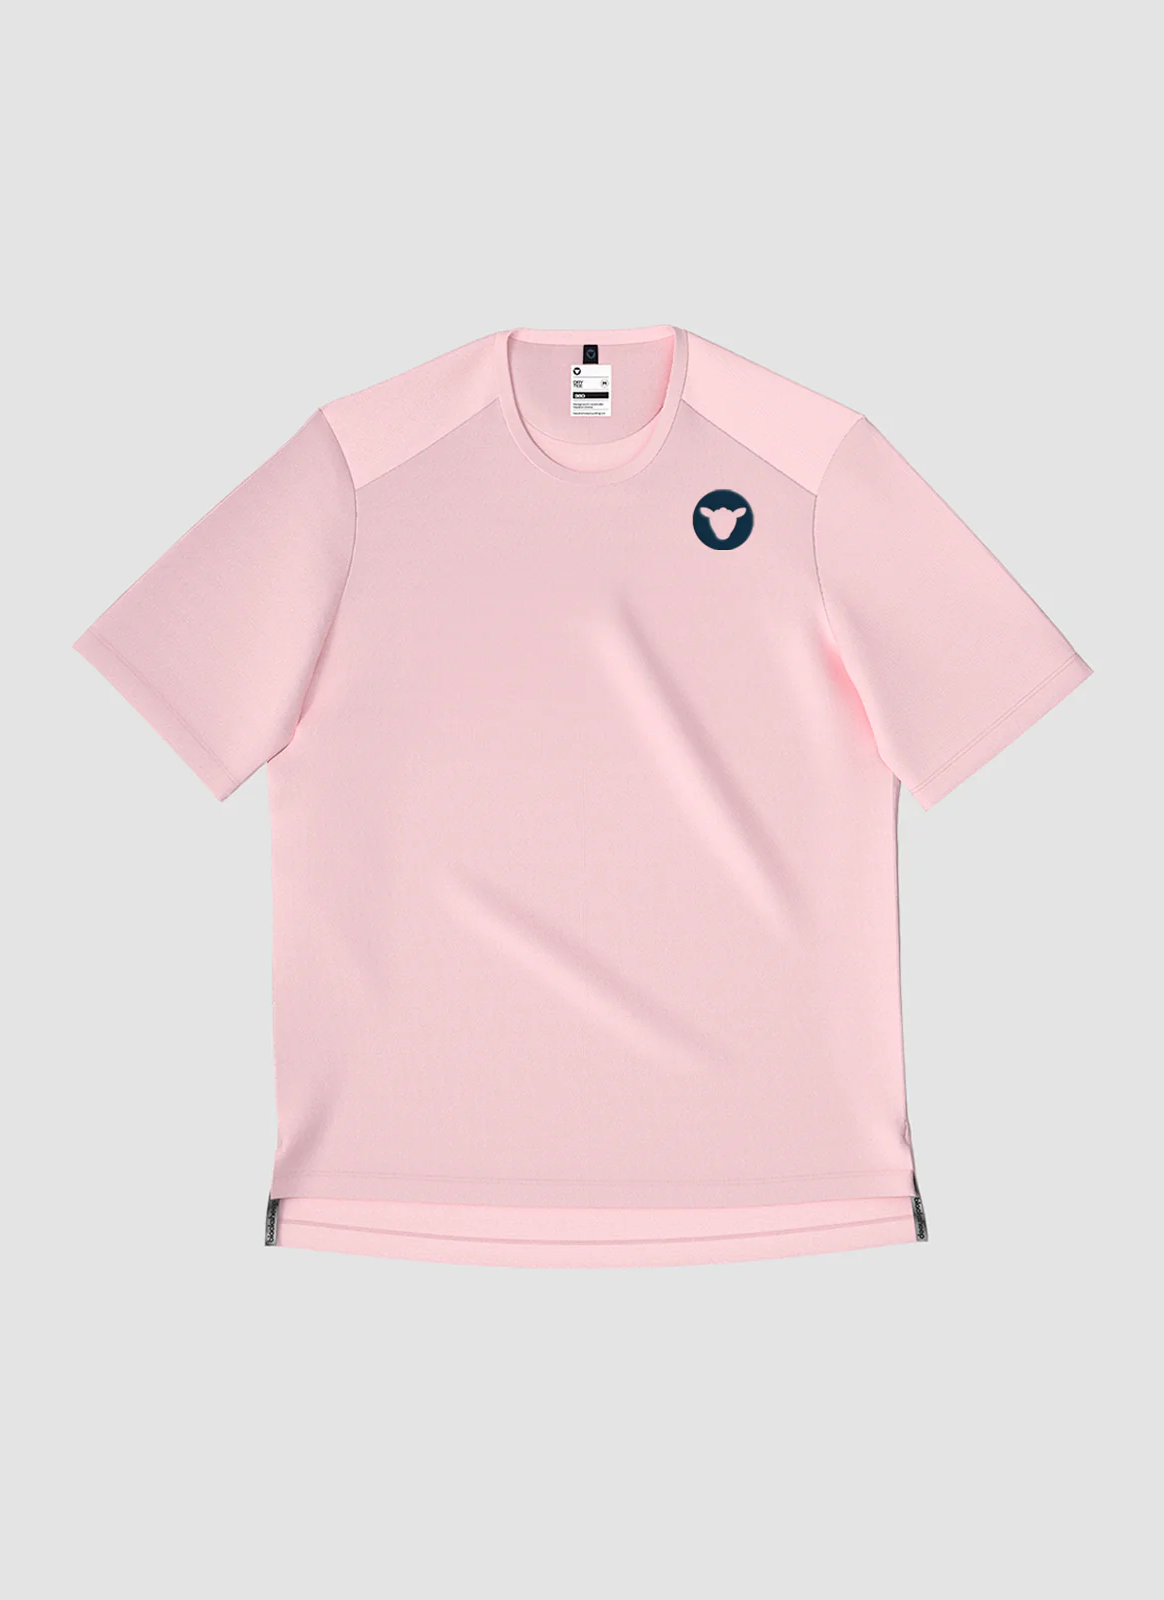 Men's Dry SS Tee - Barely Pink